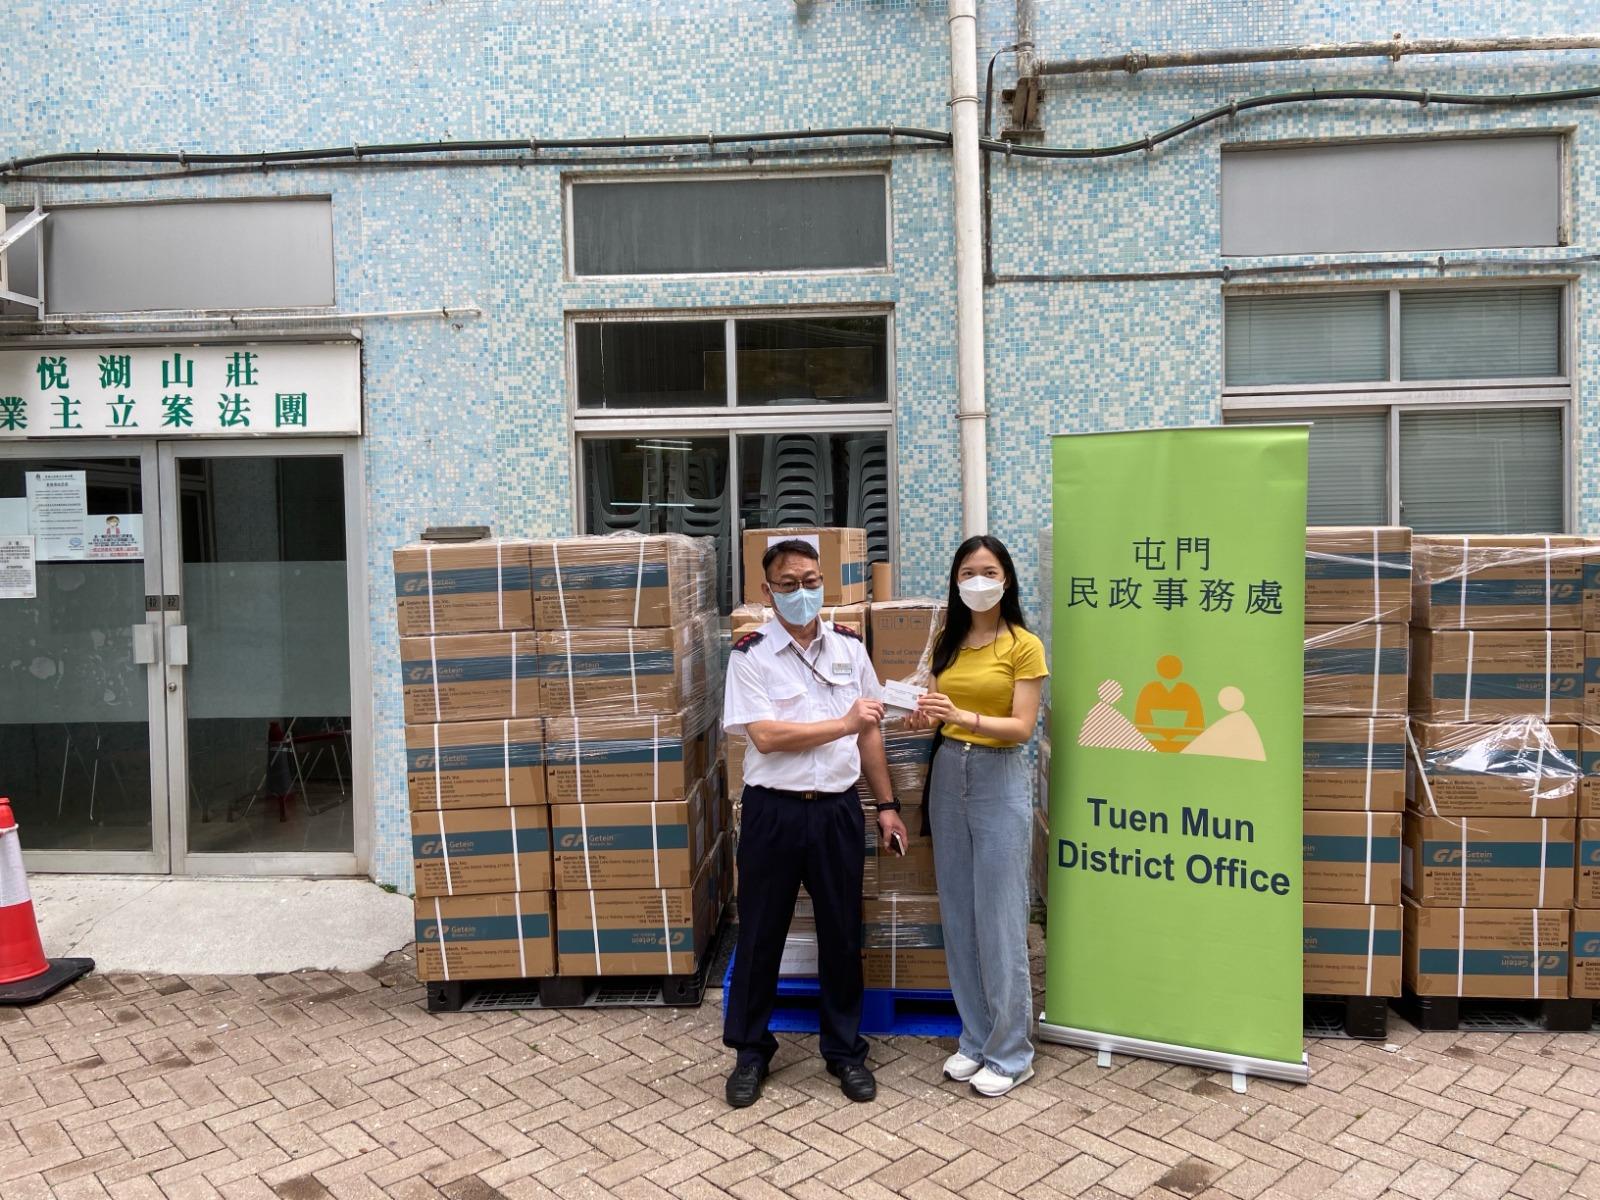 The Tuen Mun District Office today (June 11) distributed COVID-19 rapid test kits to households, cleansing workers and property management staff living and working in Yuet Wu Villa for voluntary testing through the property management company.
